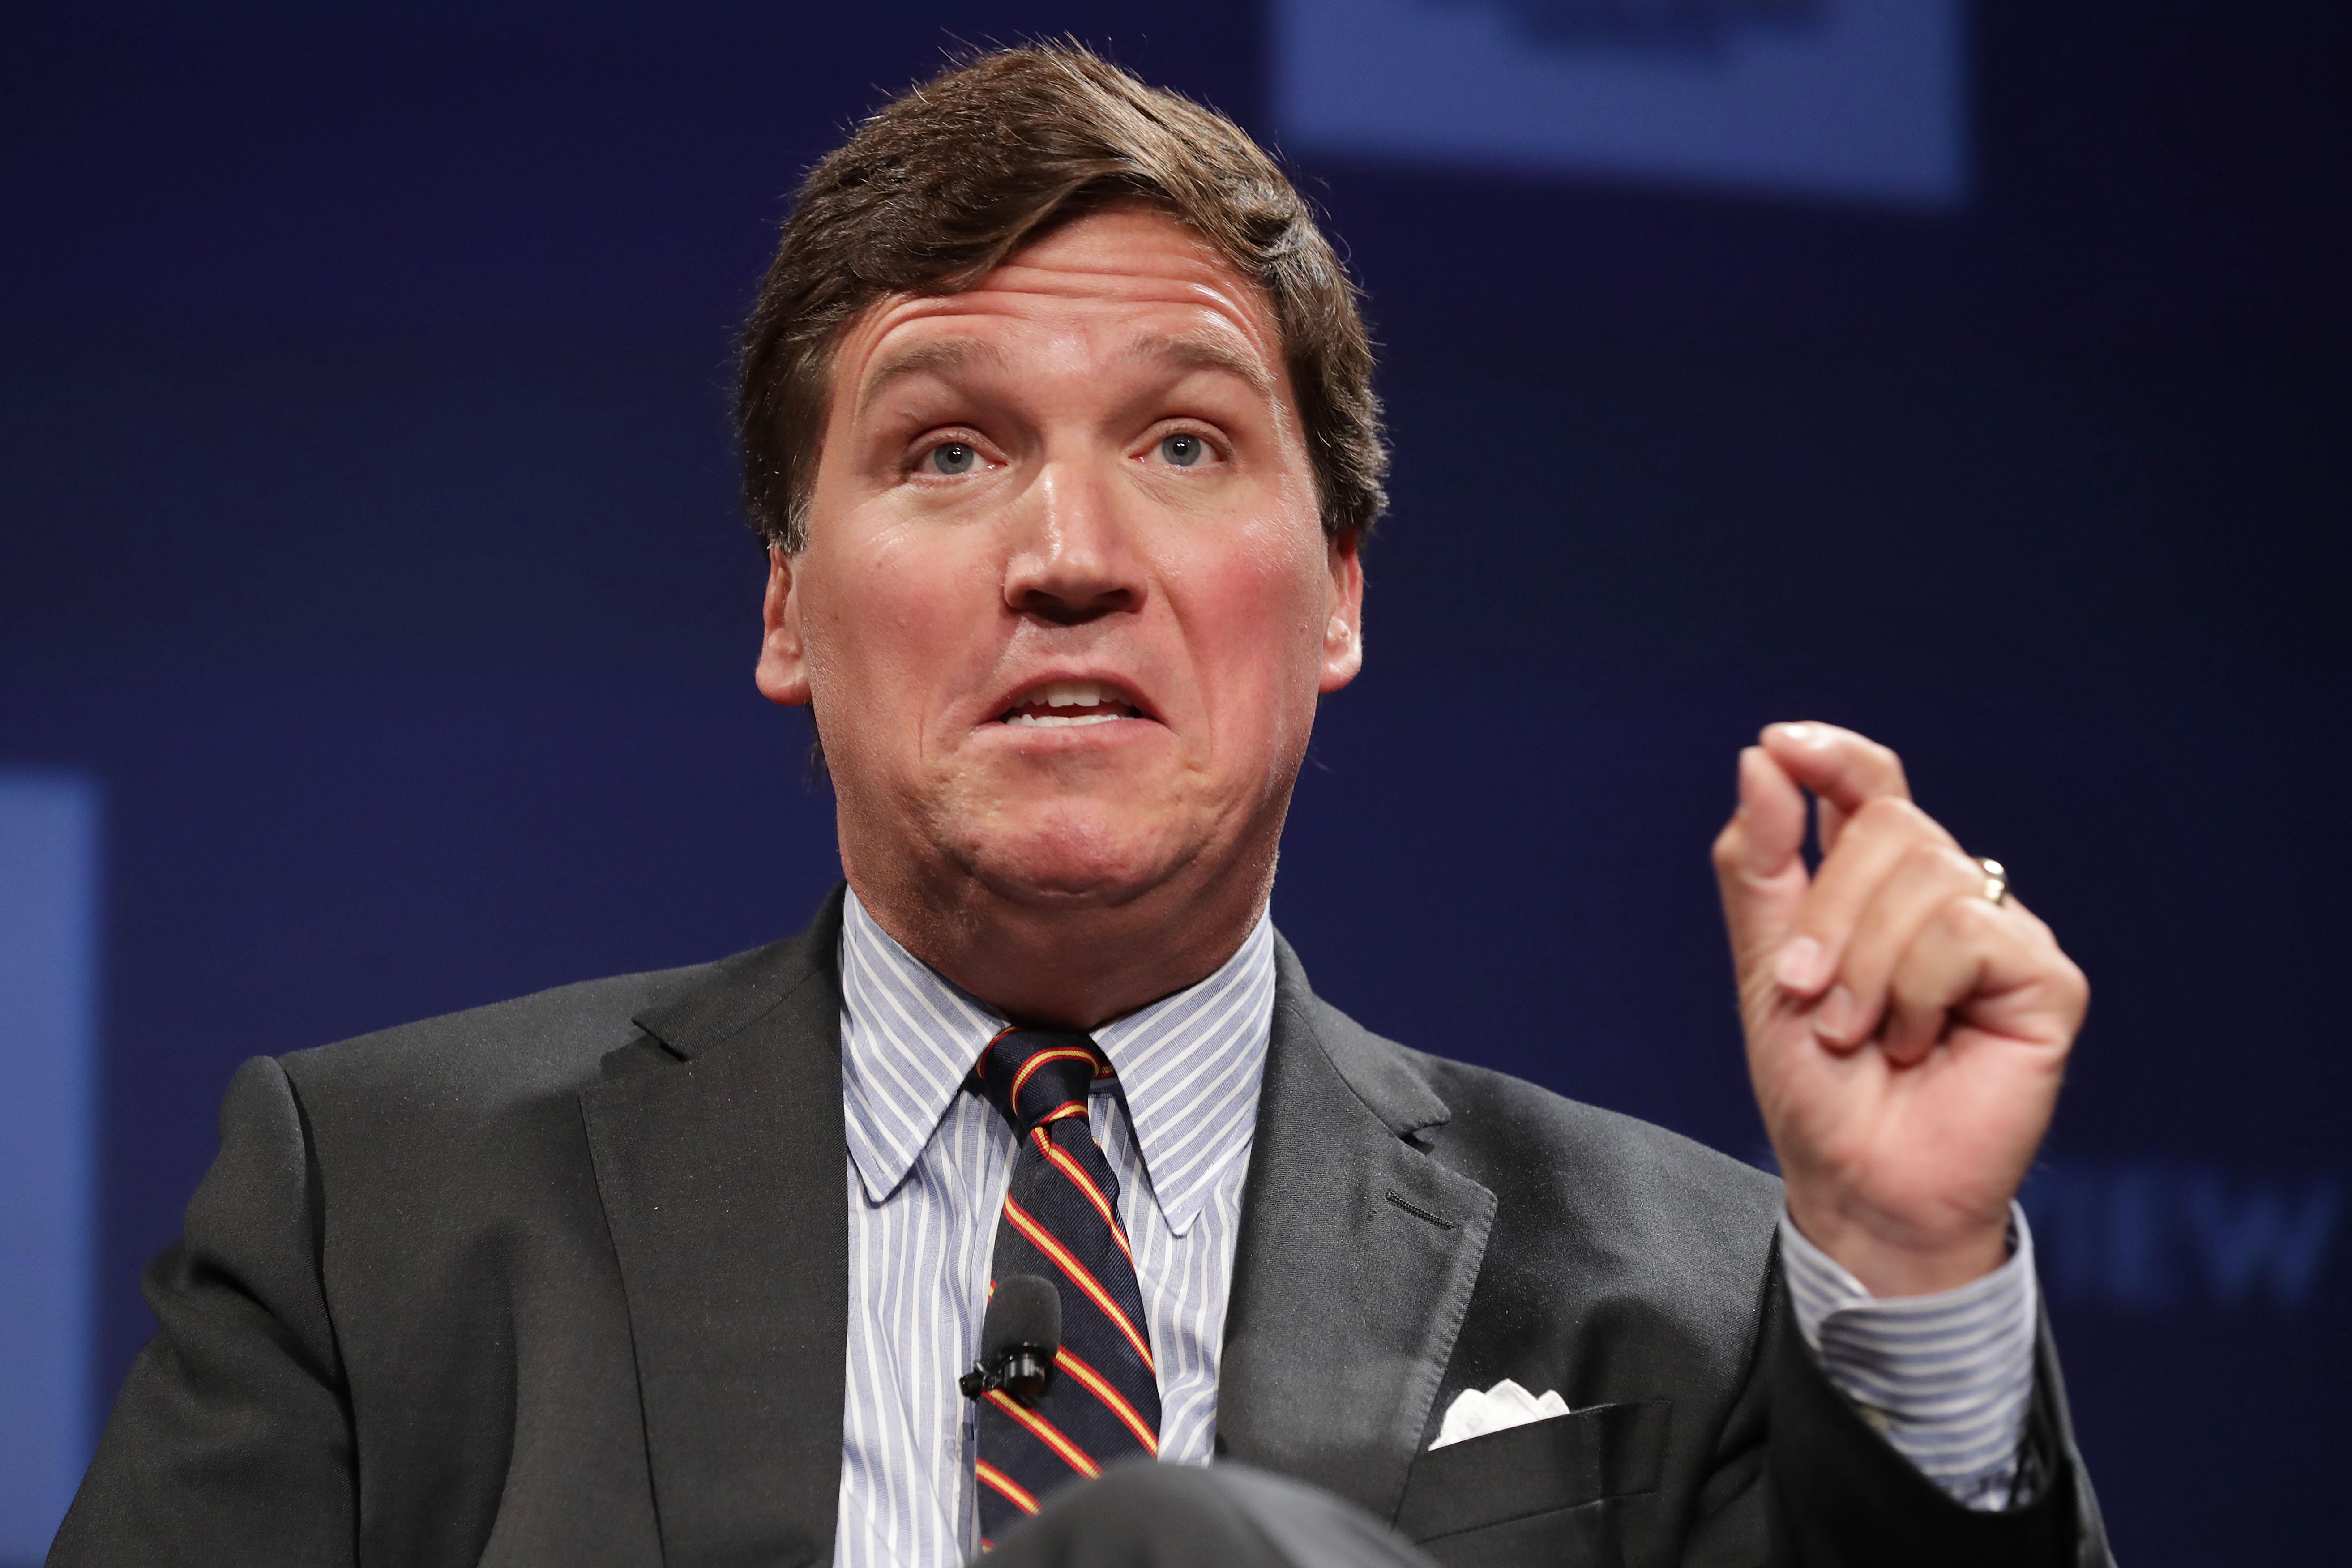 Fox News host Tucker Carlson talks during the National Review Institute's Ideas Summit at the Mandarin Oriental Hotel March 29, 2019 in Washington, D.C. 